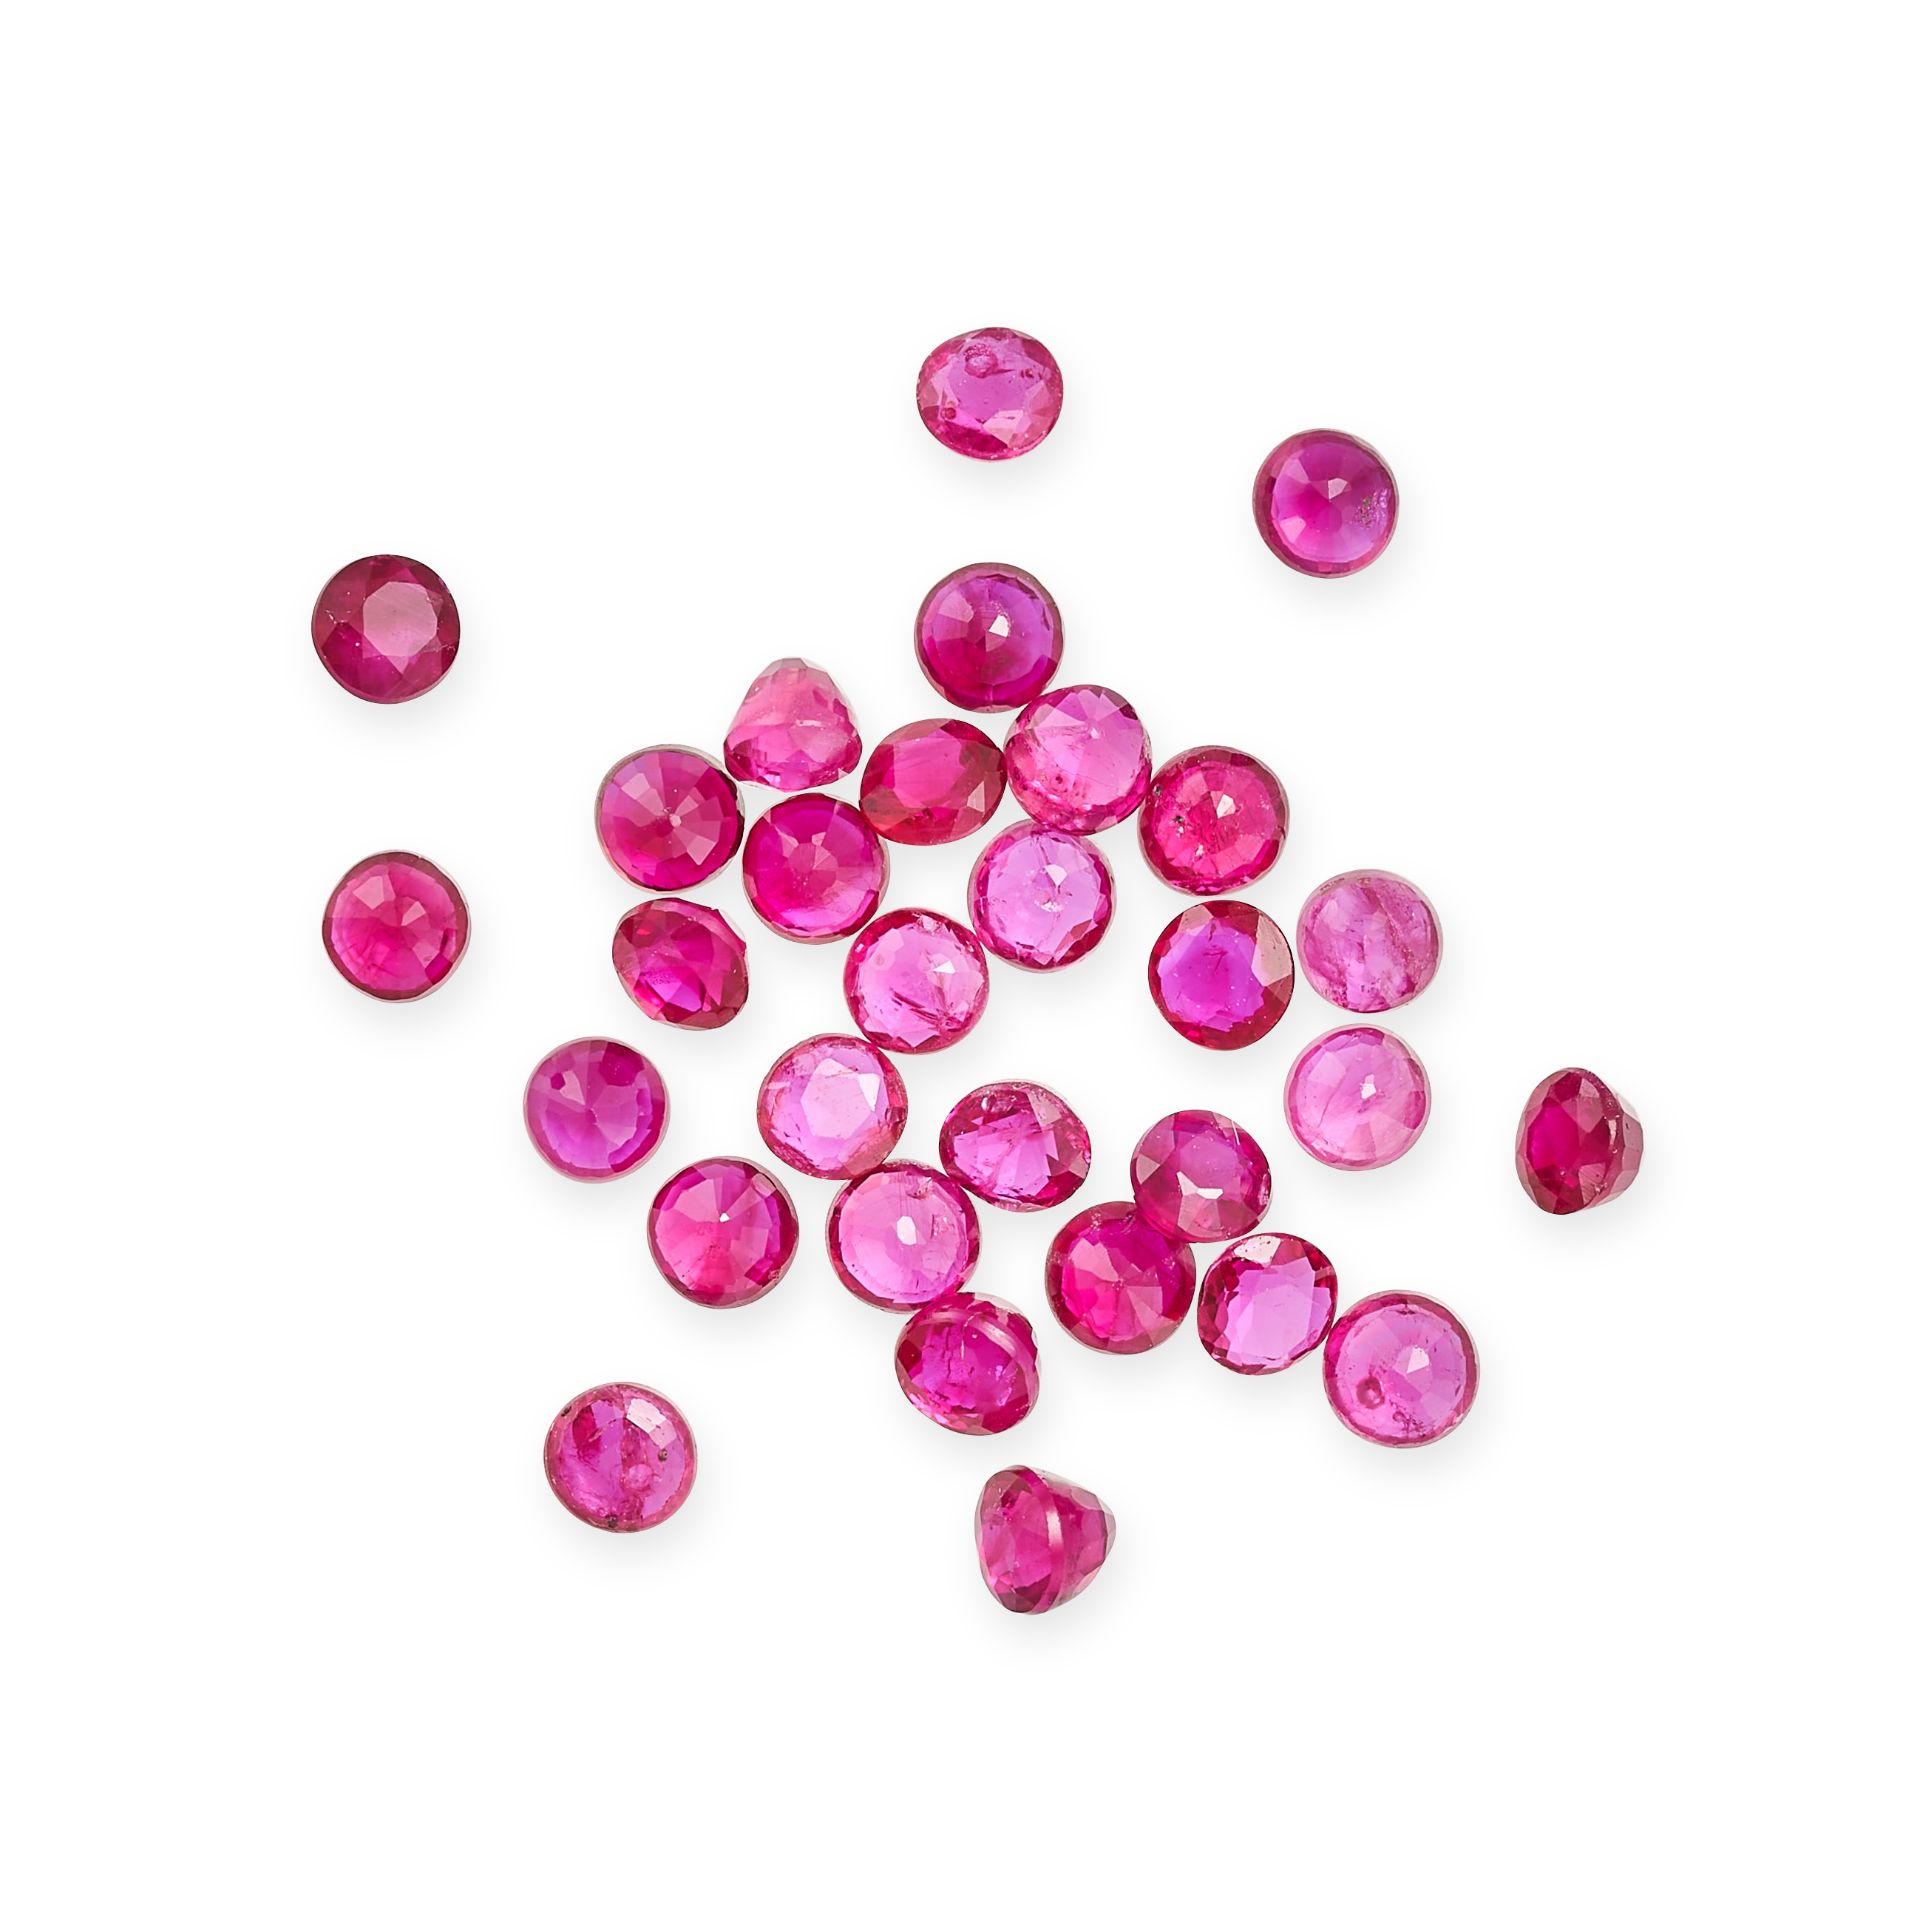 A COLLECTION OF UNMOUNTED RUBIES round cut, 1.80 carats.